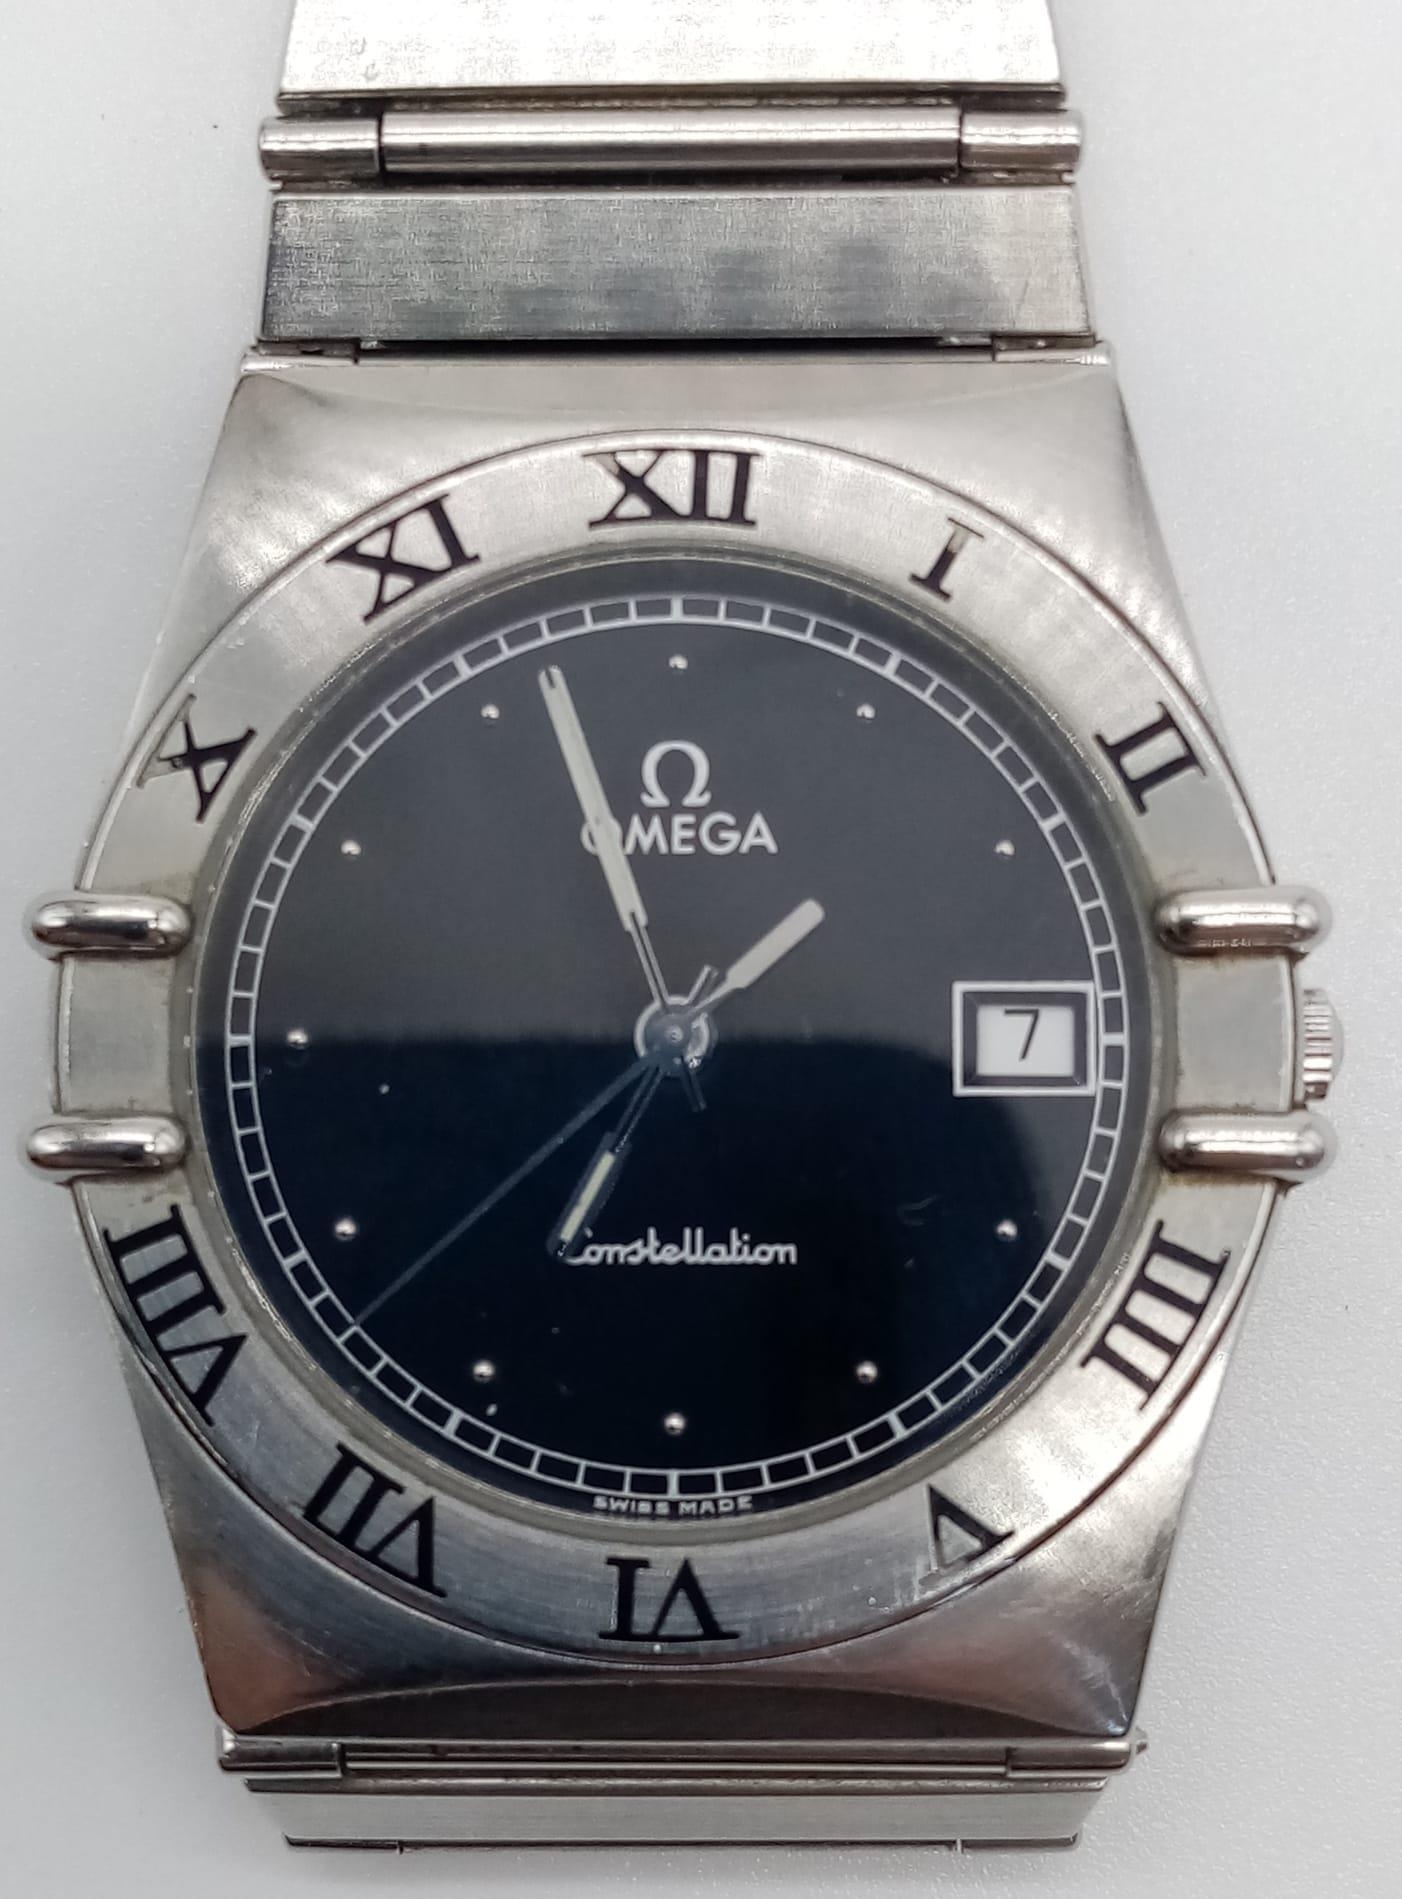 OMEGA CONSTELATION QUARTZ BRACELET WATCH WITH ORIGINAL BOX AND PAPERS. 32mm. Needs batteries. - Image 3 of 13